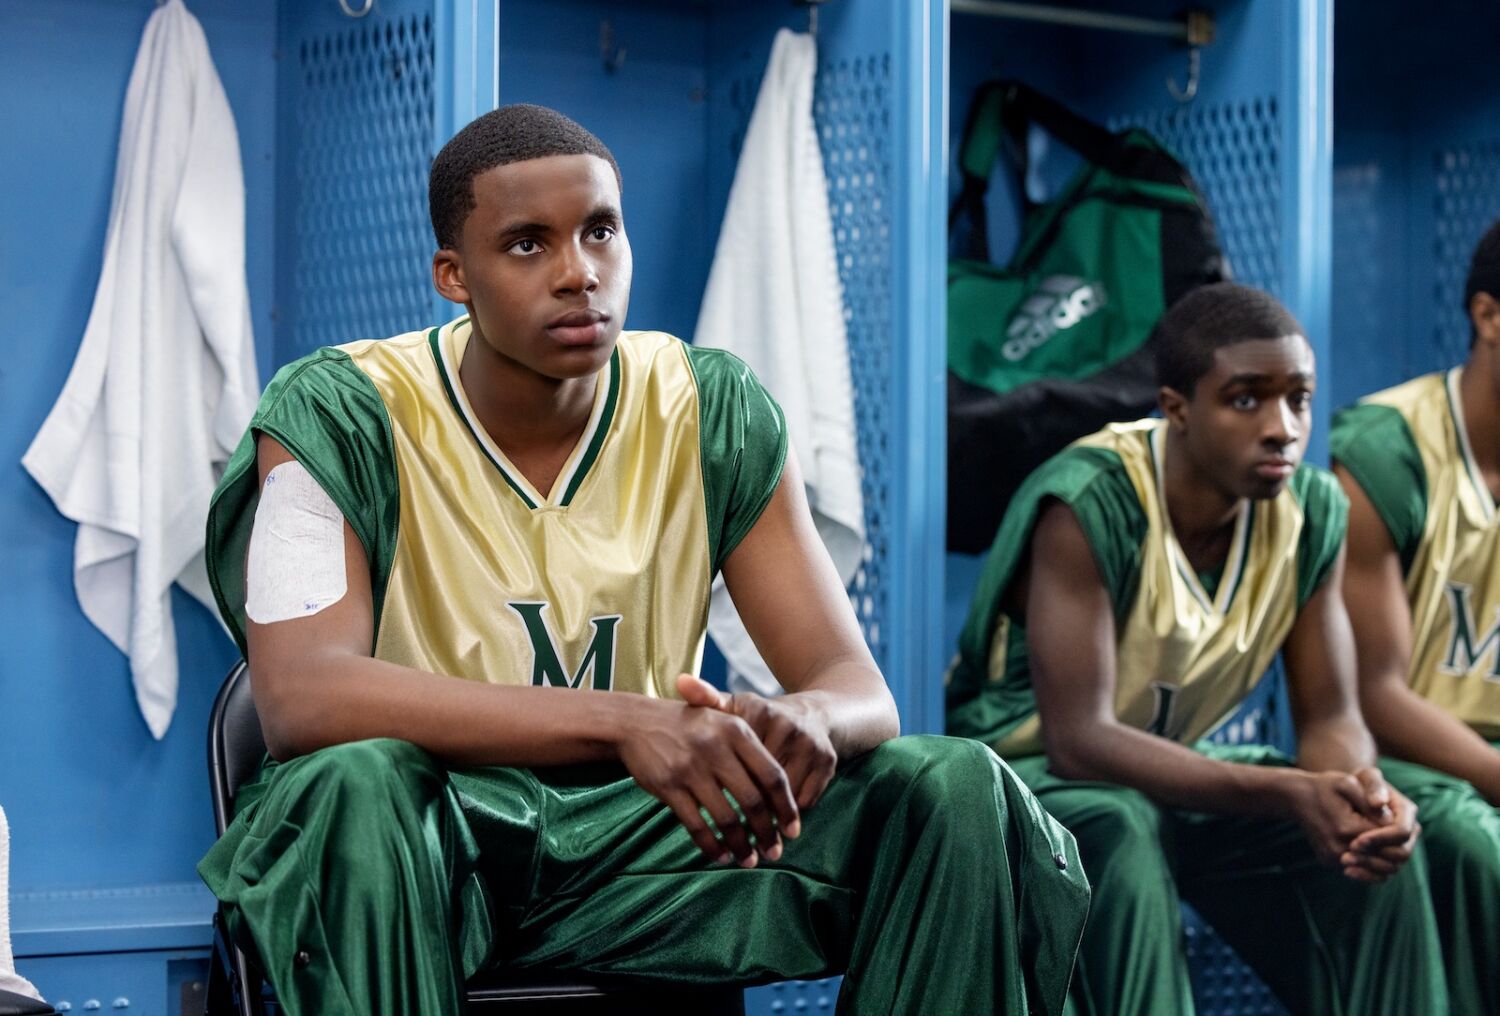 Review: The adventures of young LeBron James prove stubbornly undramatic in 'Shooting Stars'